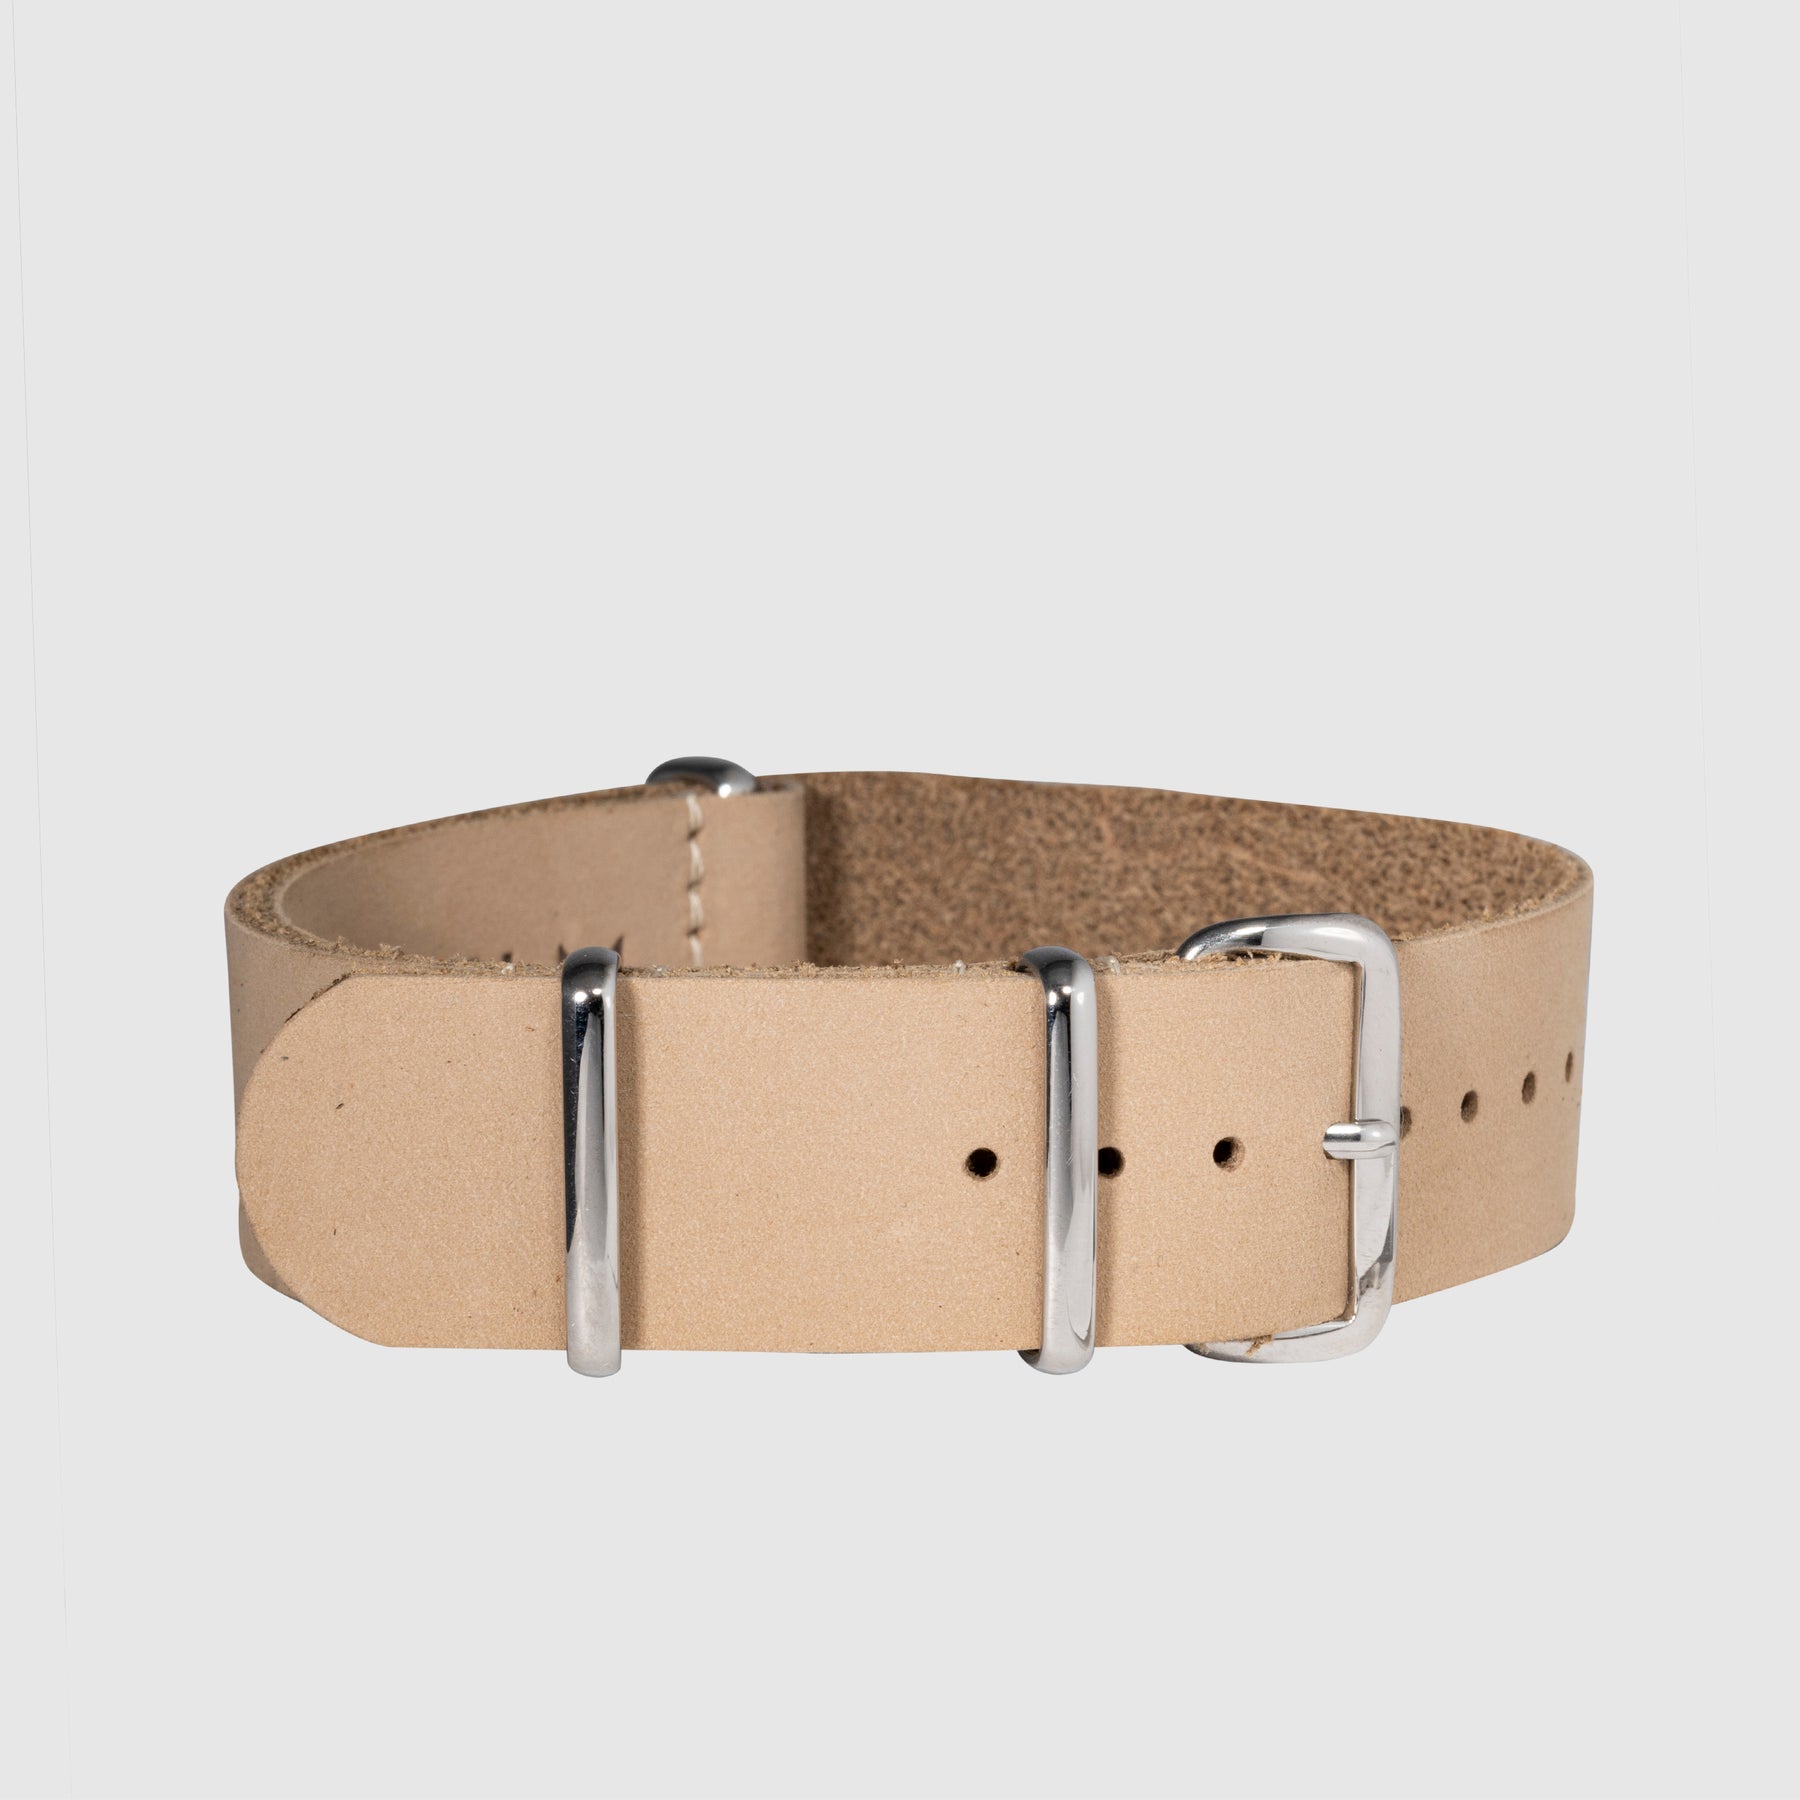 Leather Nato Strap - Smooth Finish (Multiple Sizes & Colors)